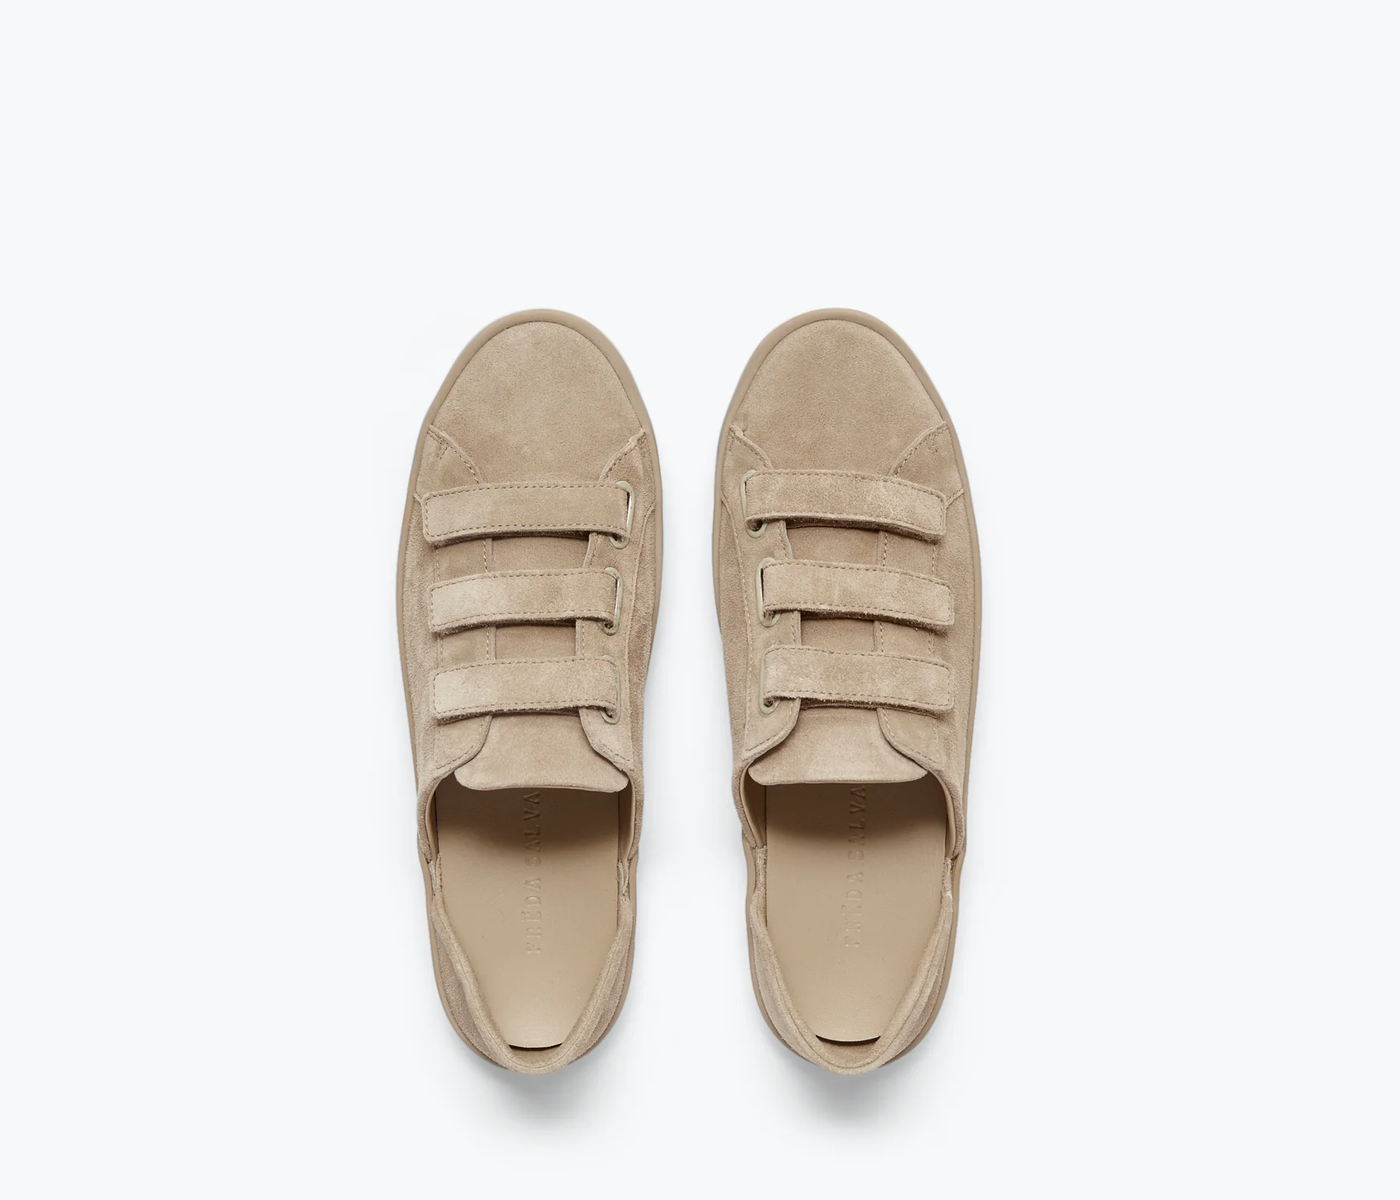 LIBBY D'ORSAY SNEAKER IN STUCCO SUEDE - Romi Boutique